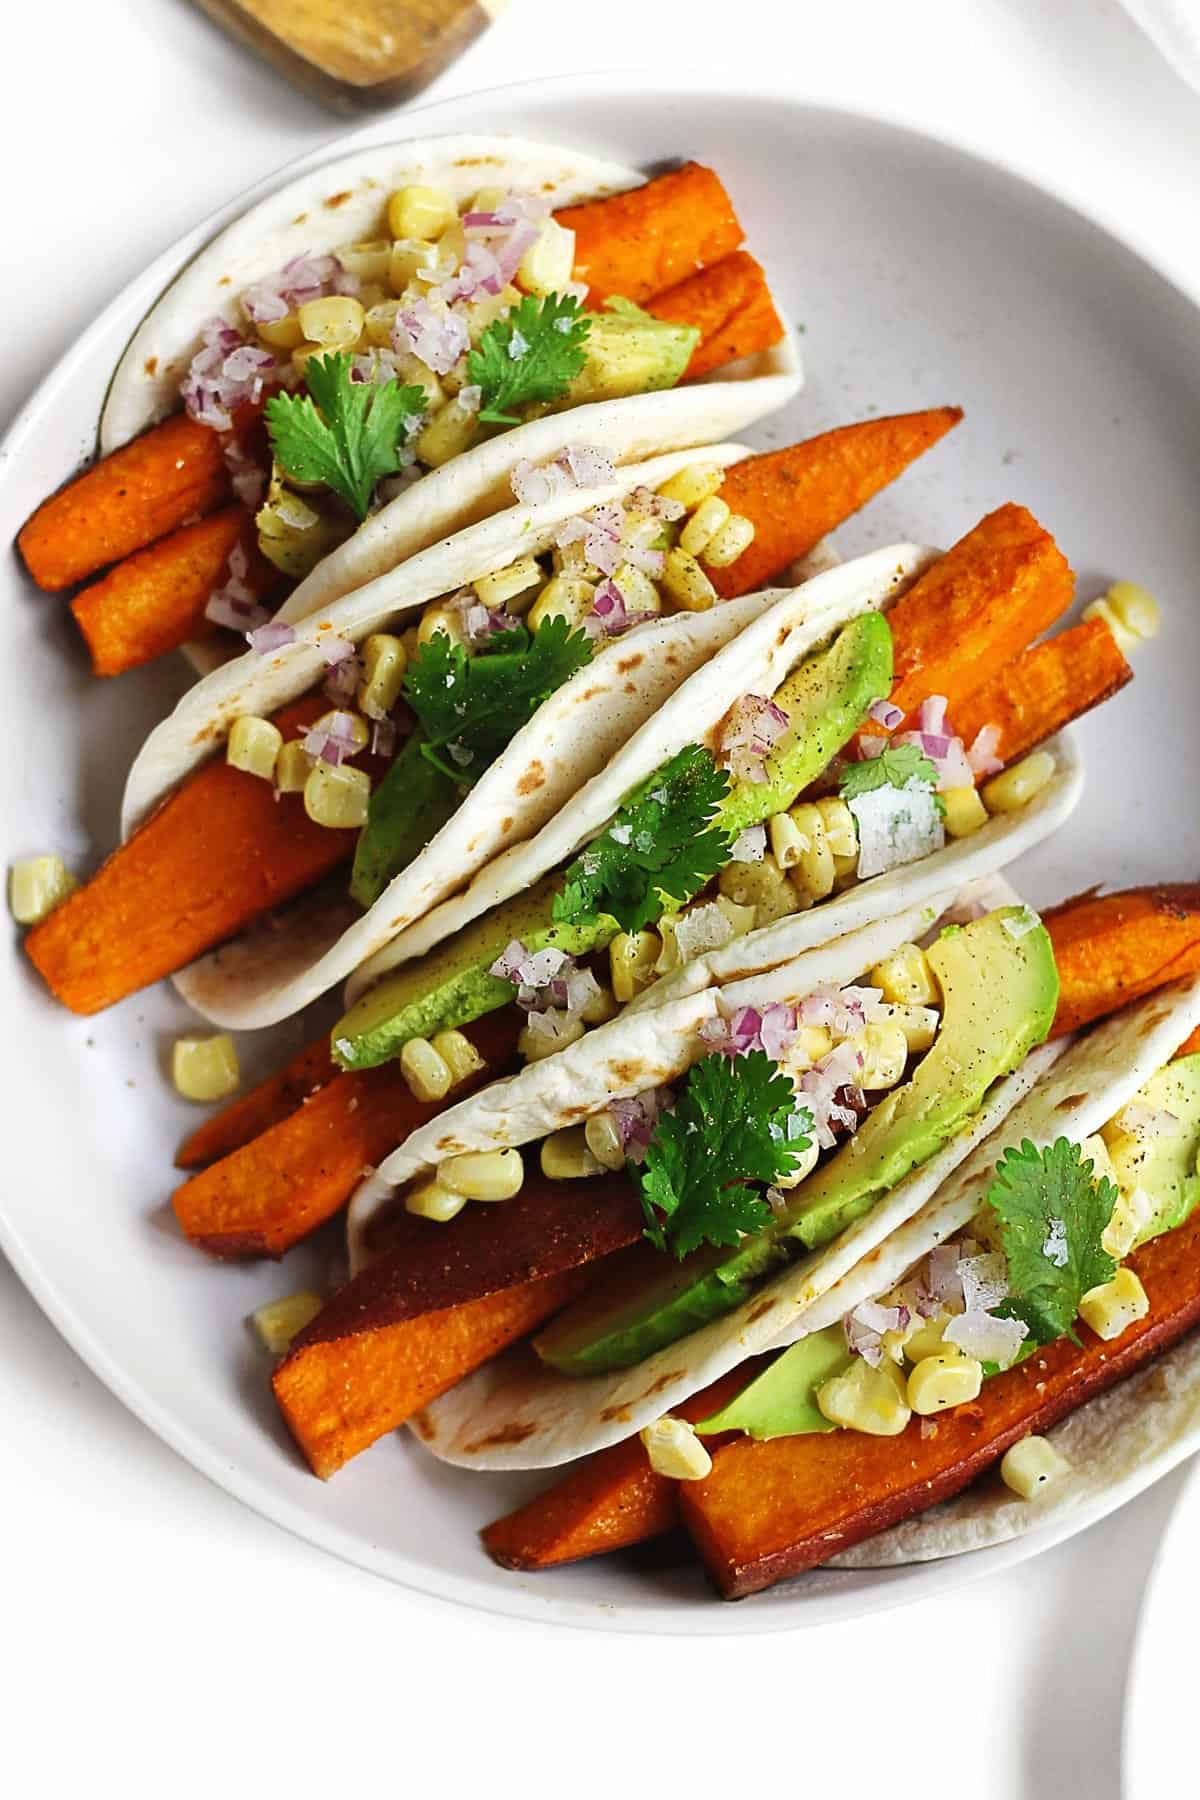 A photo of five small sweet potato tacos on a white plate.